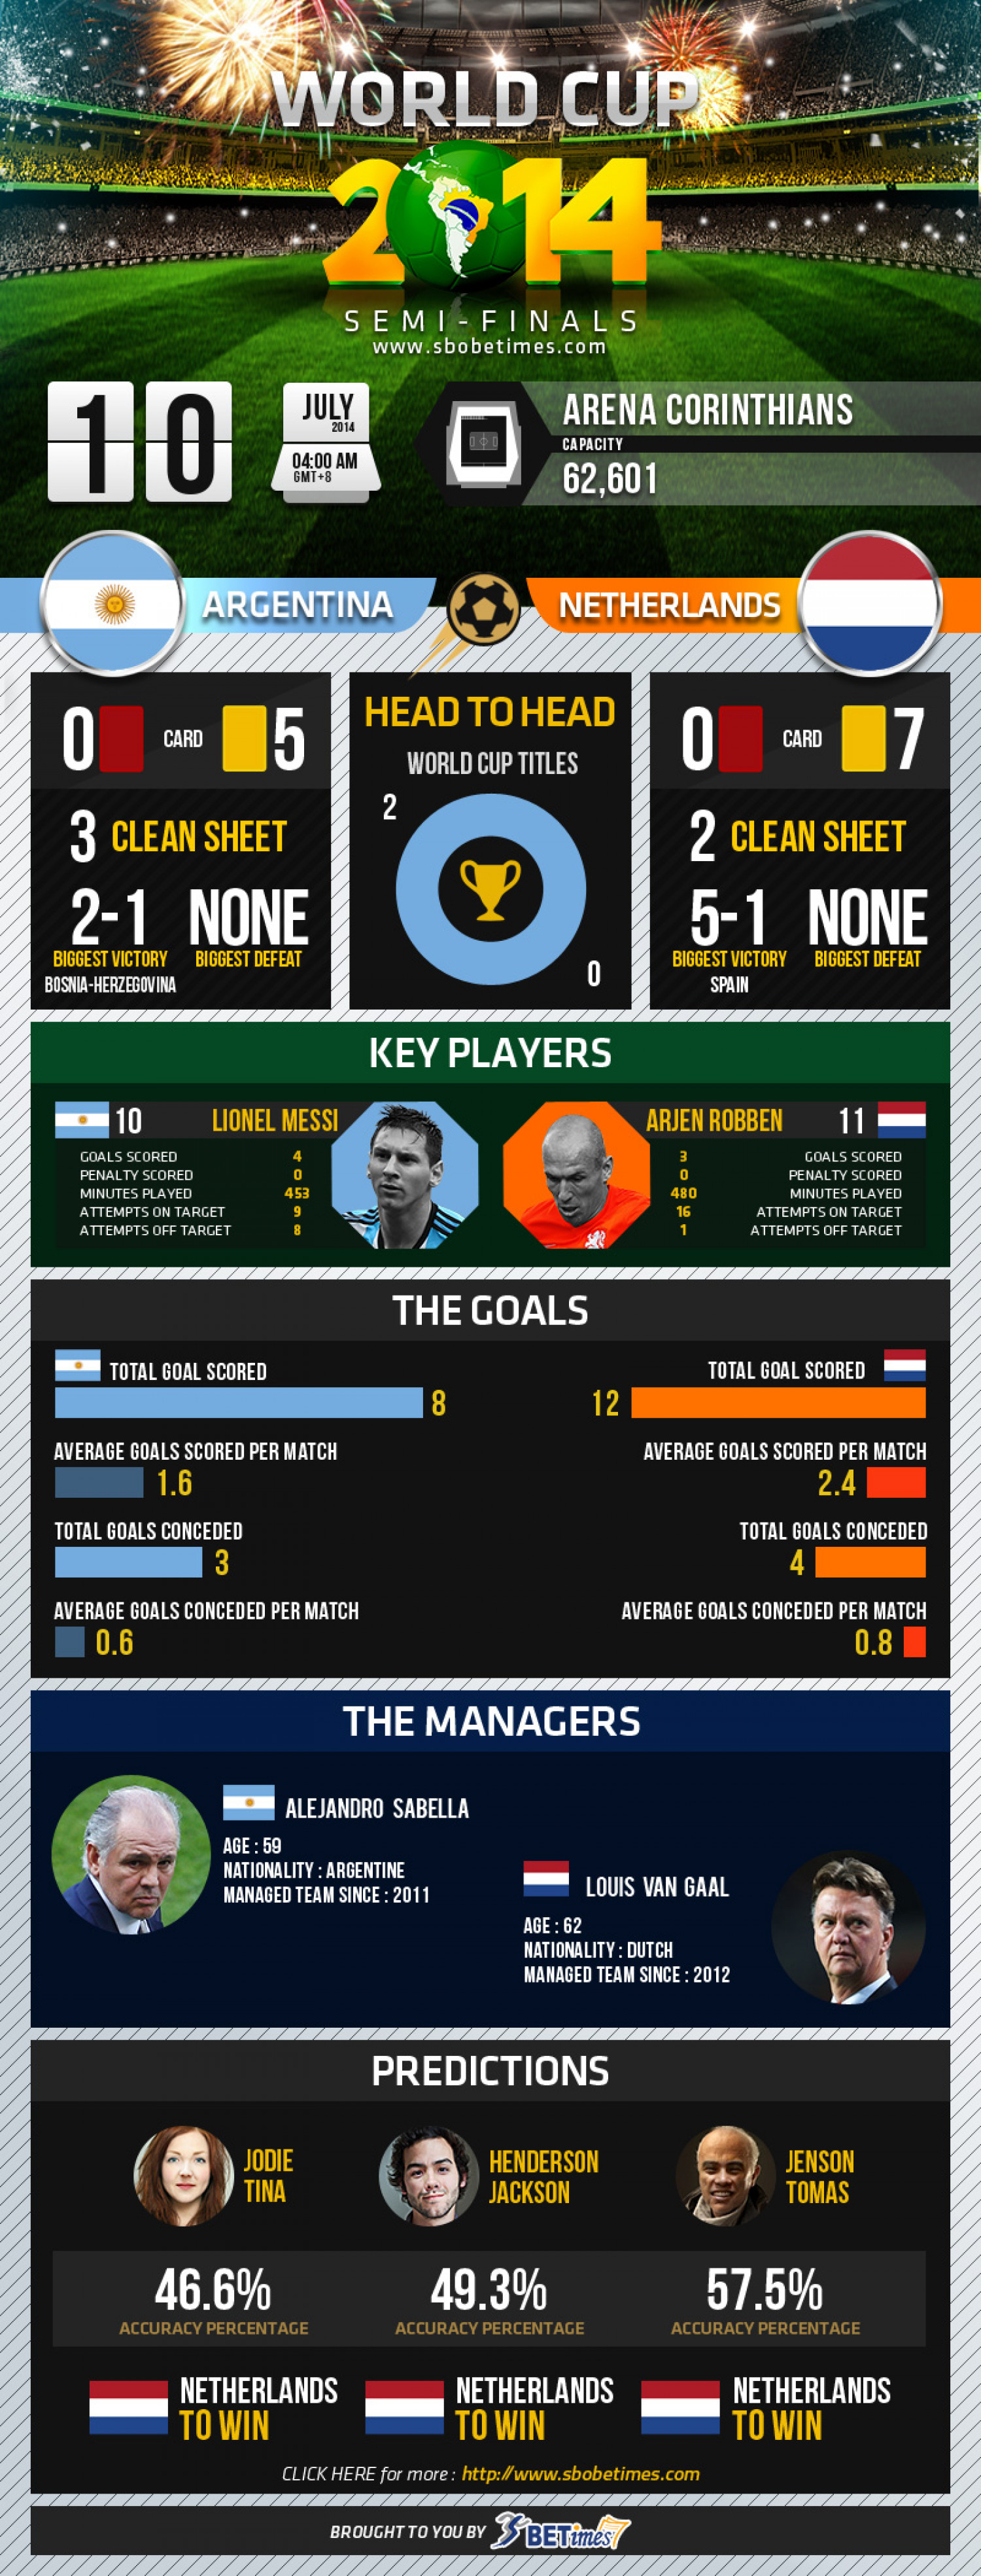 World Cup 2014 - Semi-finals - Argentina vs Netherlands Infographic